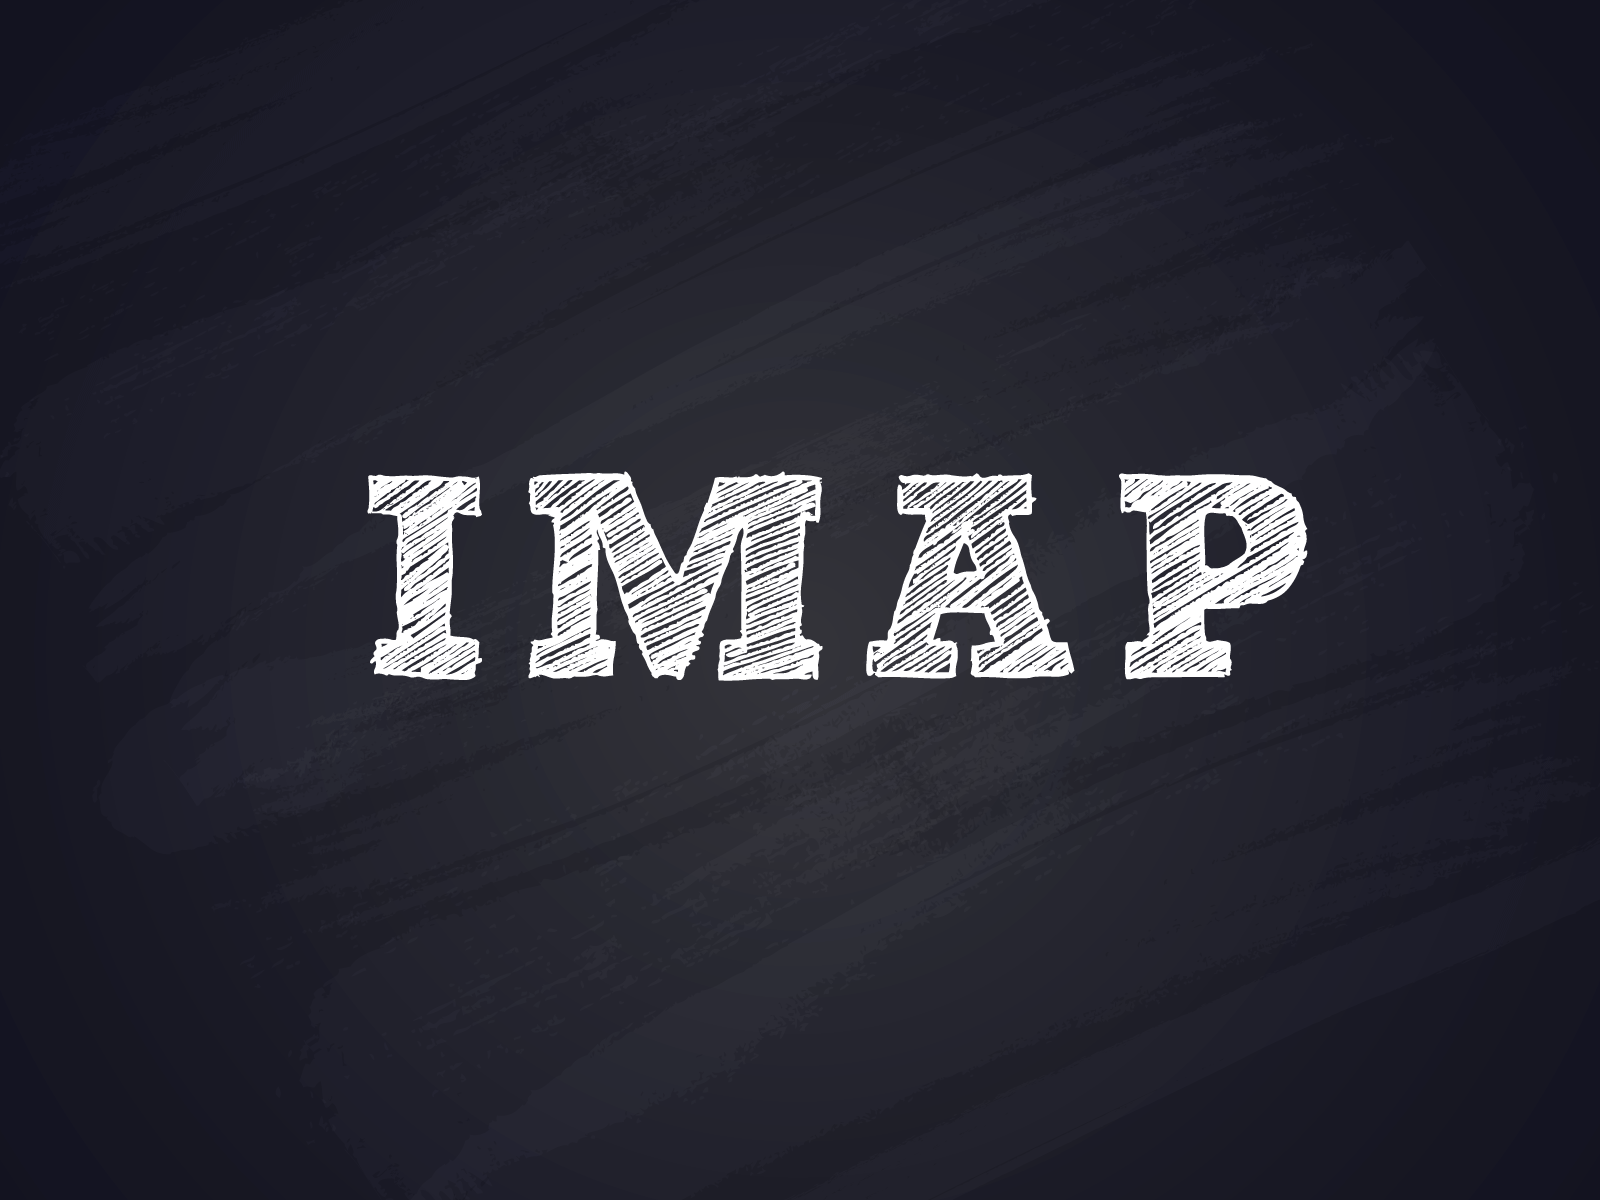 IMAP - IMAP commands - IMAP tutorial - atmail email experts - email hosting